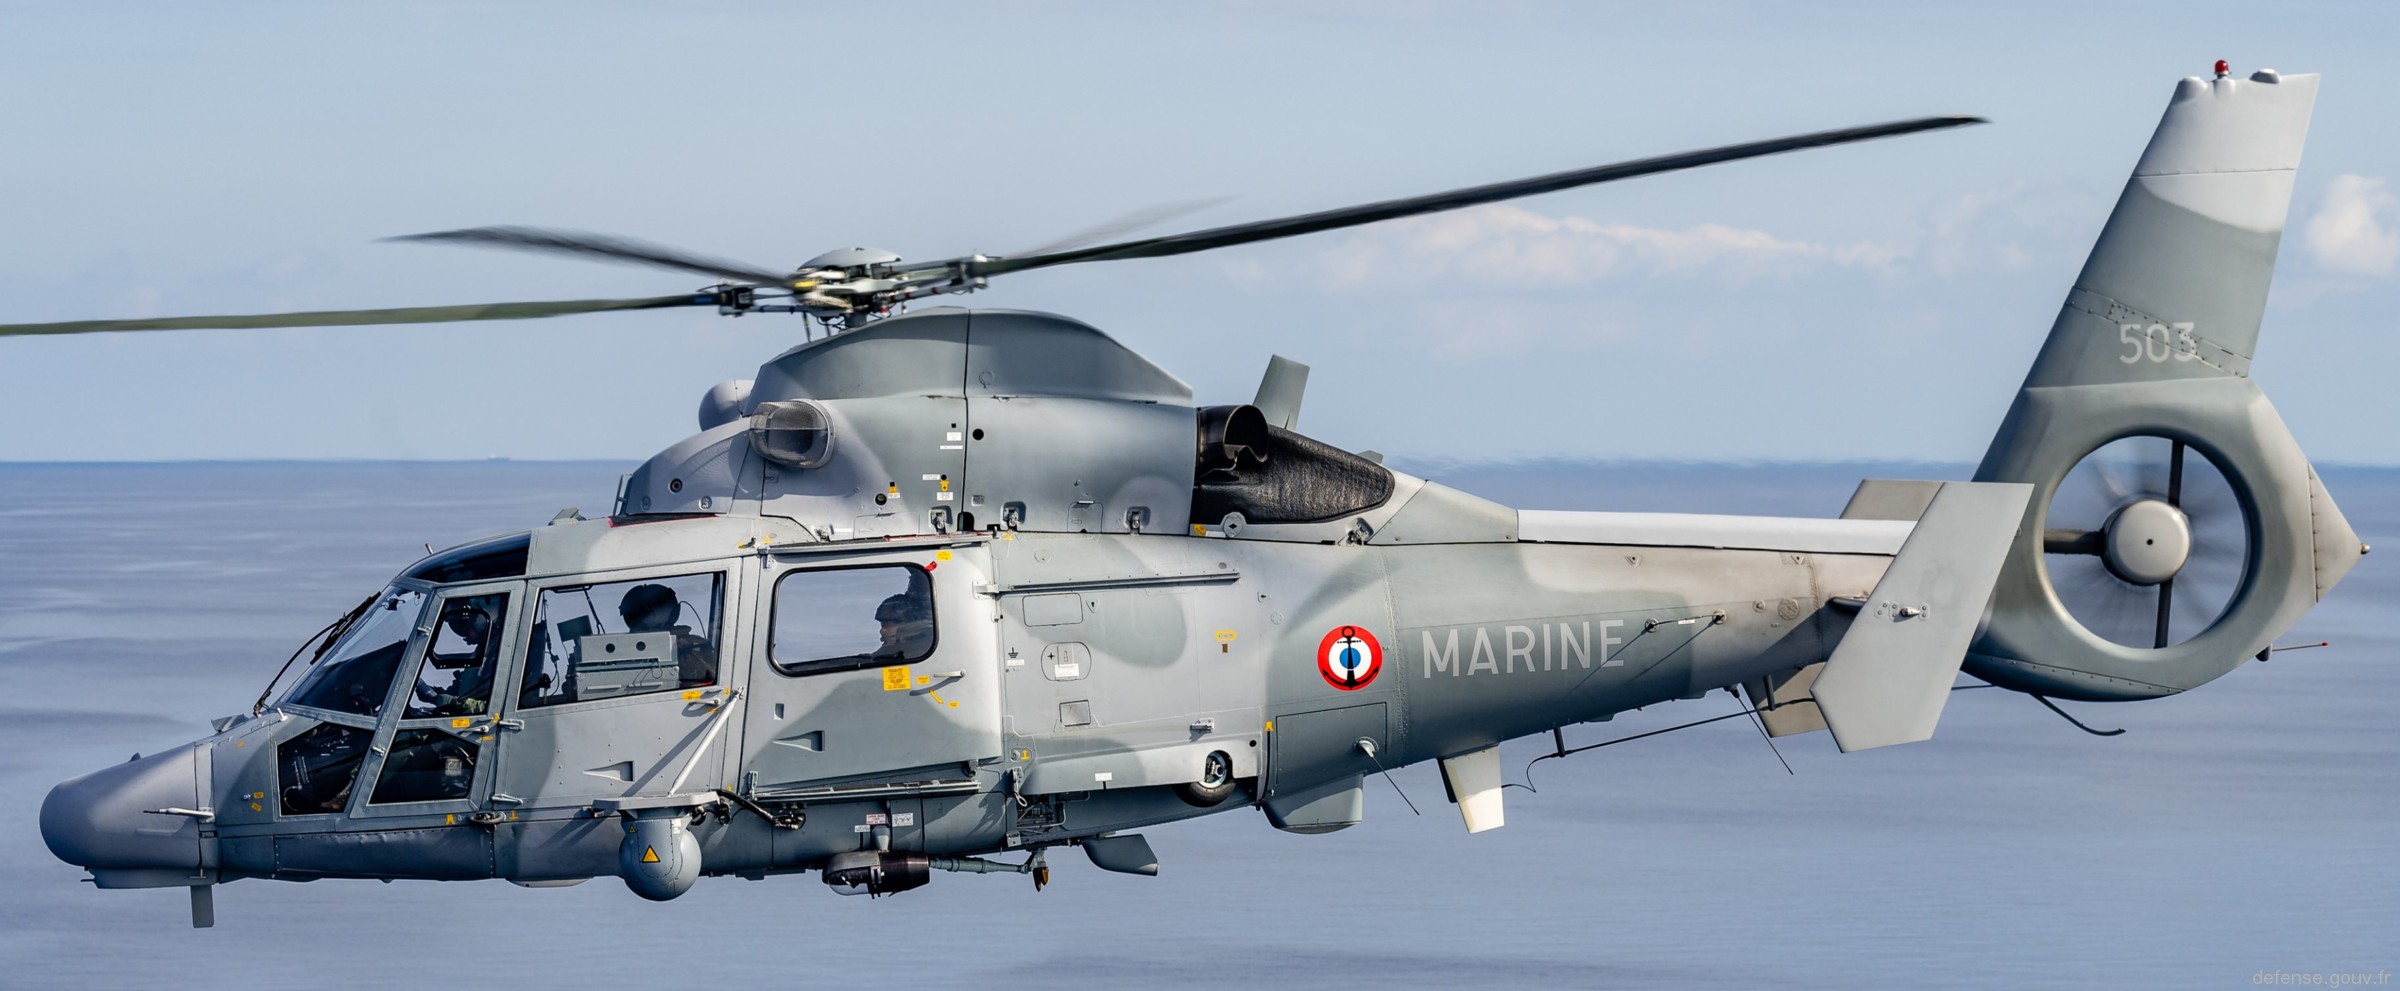 as-565sa panther helicopter french navy marine nationale flottille 36f ban hyeres toulon 48 eurocopter airbus